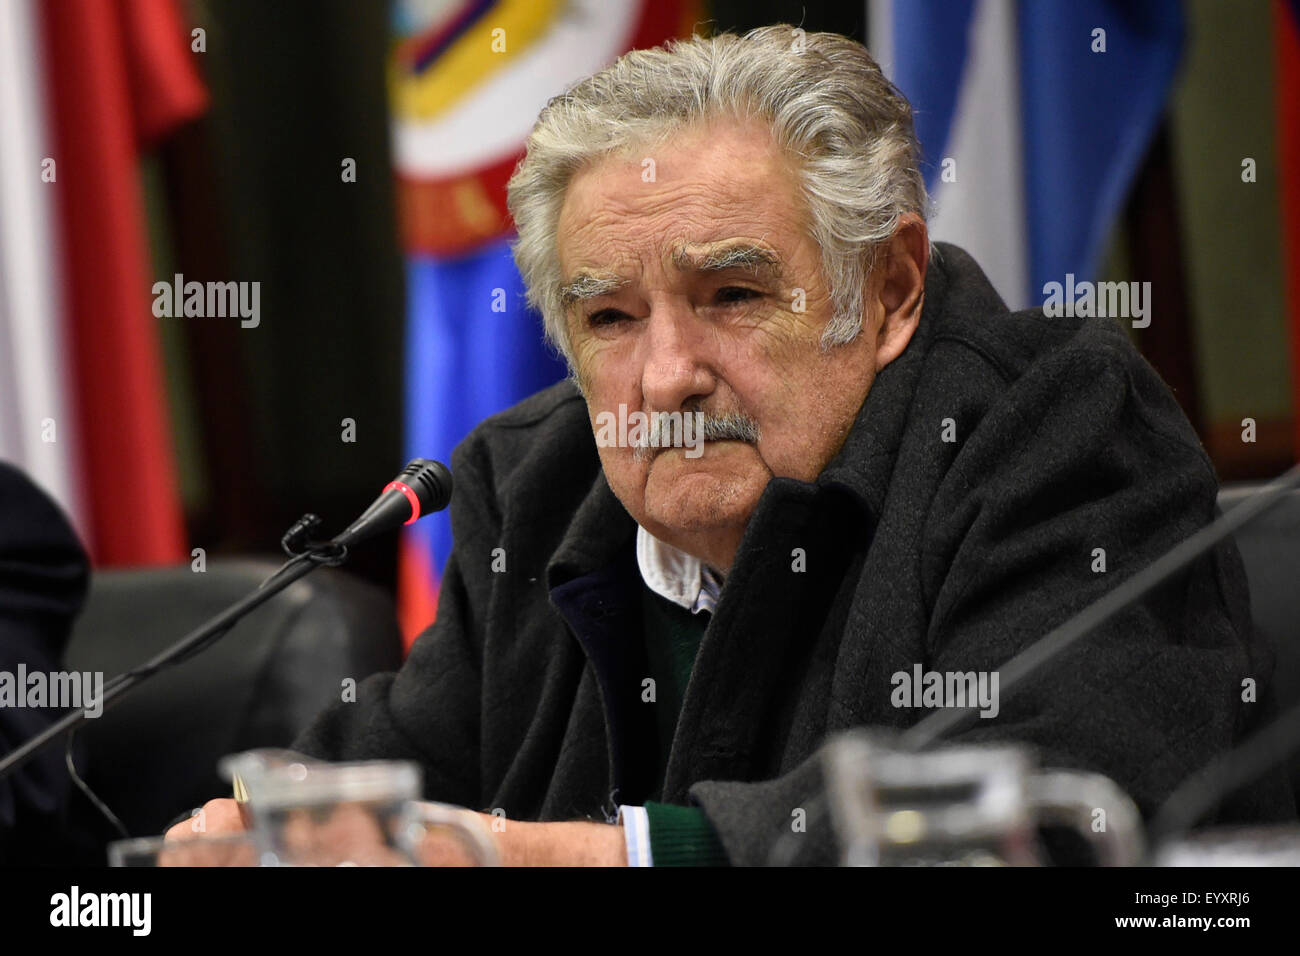 Montevideo, Uruguay. 4th Aug, 2015. Senator and former President of Uruguay Jose Mujica takes part in the conference 'The integration prospects viewed from Brazil and Uruguay', in the seat of the Latin American Integration Association (ALADI), in Montevideo, capital of Uruguay, on August 4, 2015. Credit:  Nicolas Celaya/Xinhua/Alamy Live News Stock Photo